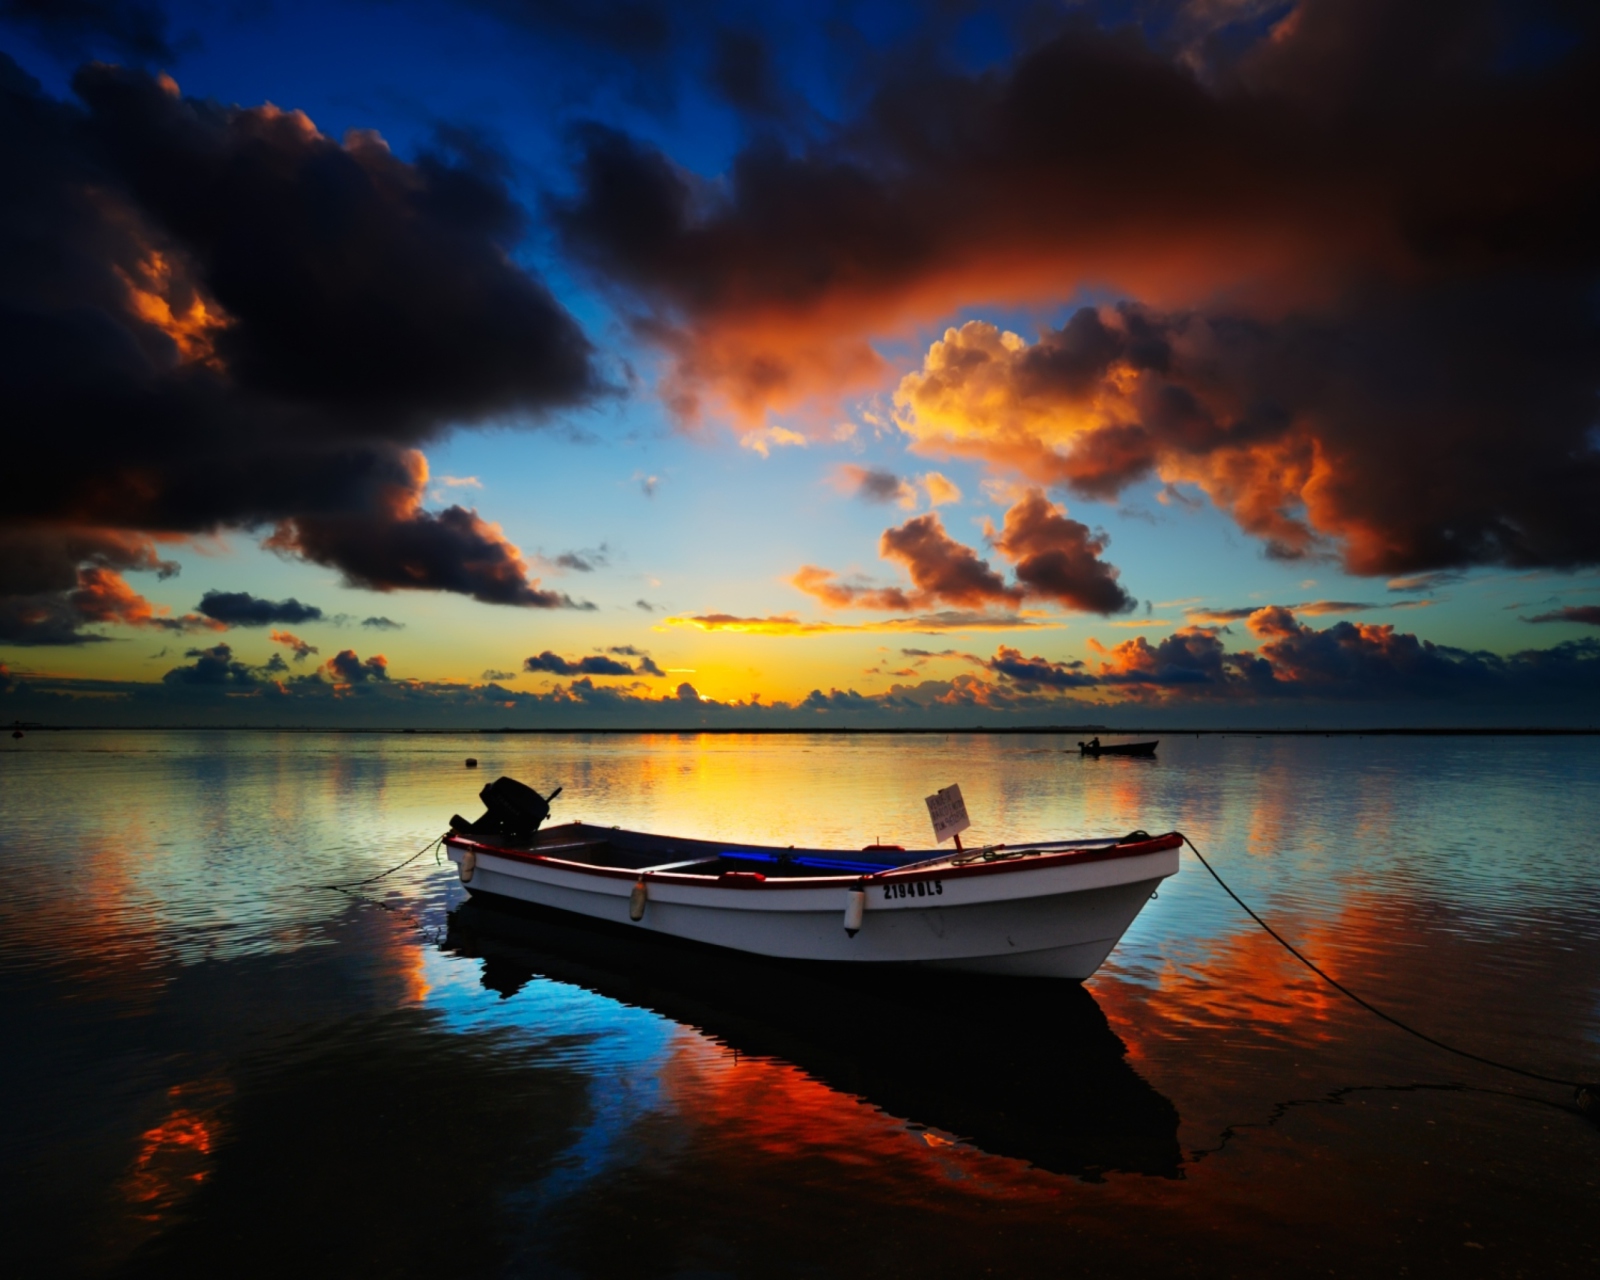 Das Boat In Sea At Sunset Wallpaper 1600x1280